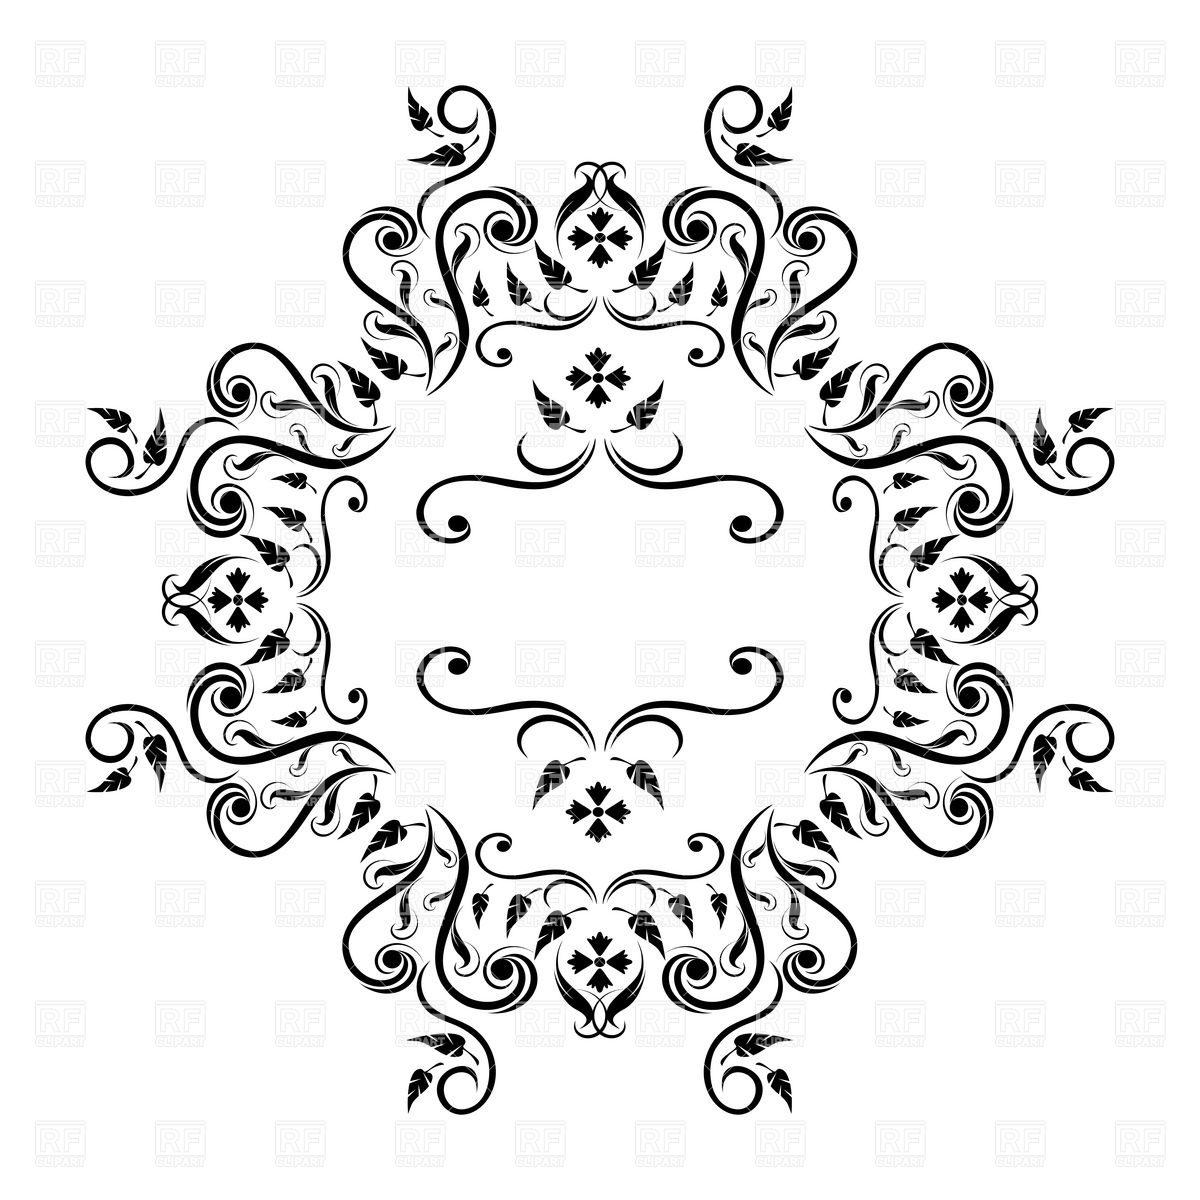 Curly Line Design Ornate Curly Clip Art Vector